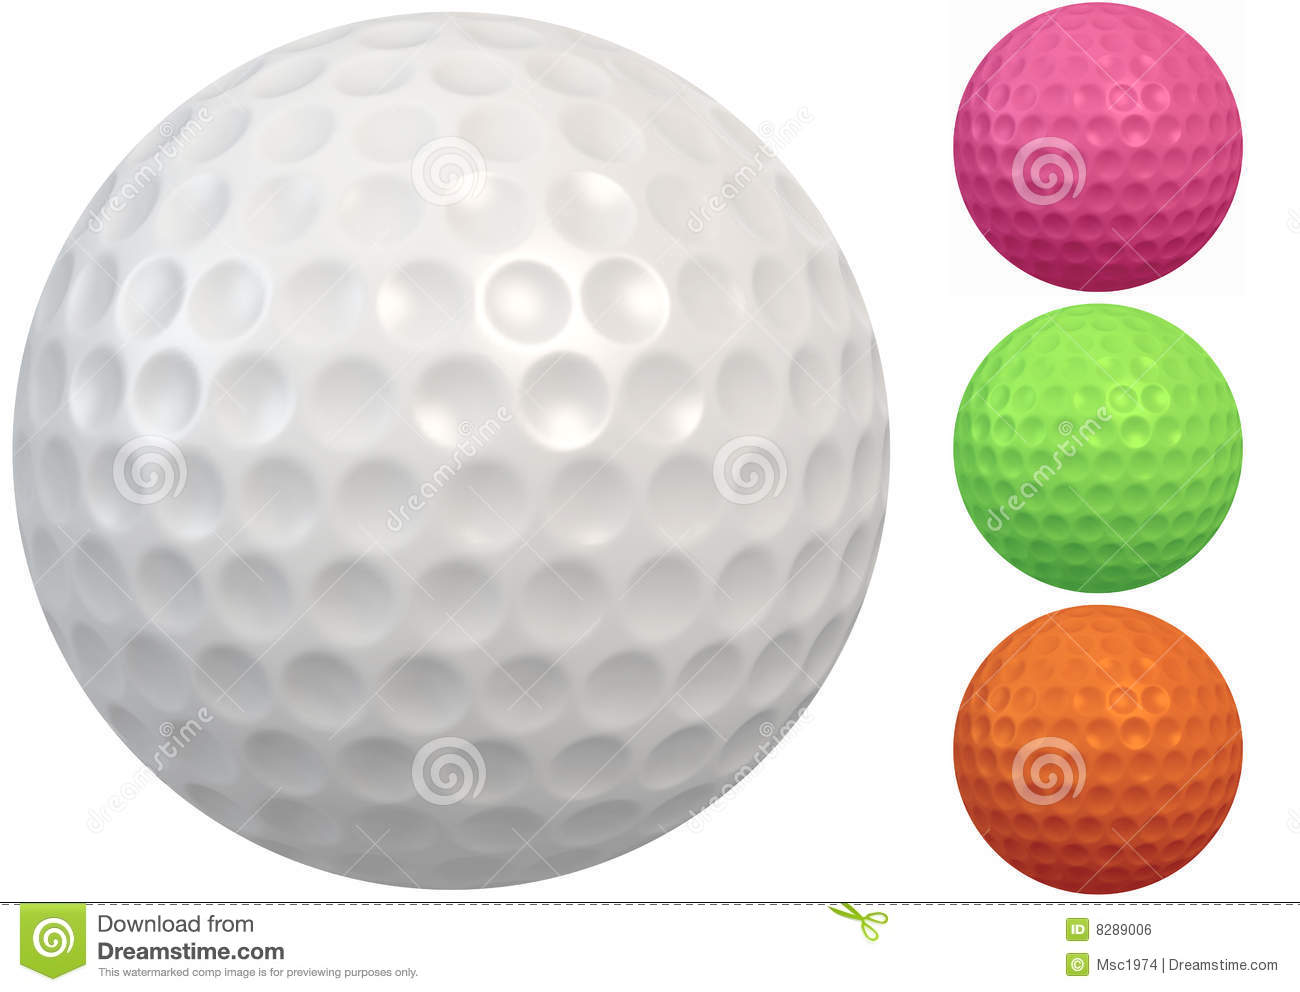 Golf Ball With Round Dimples Royalty Free Stock Image   Image  8289006